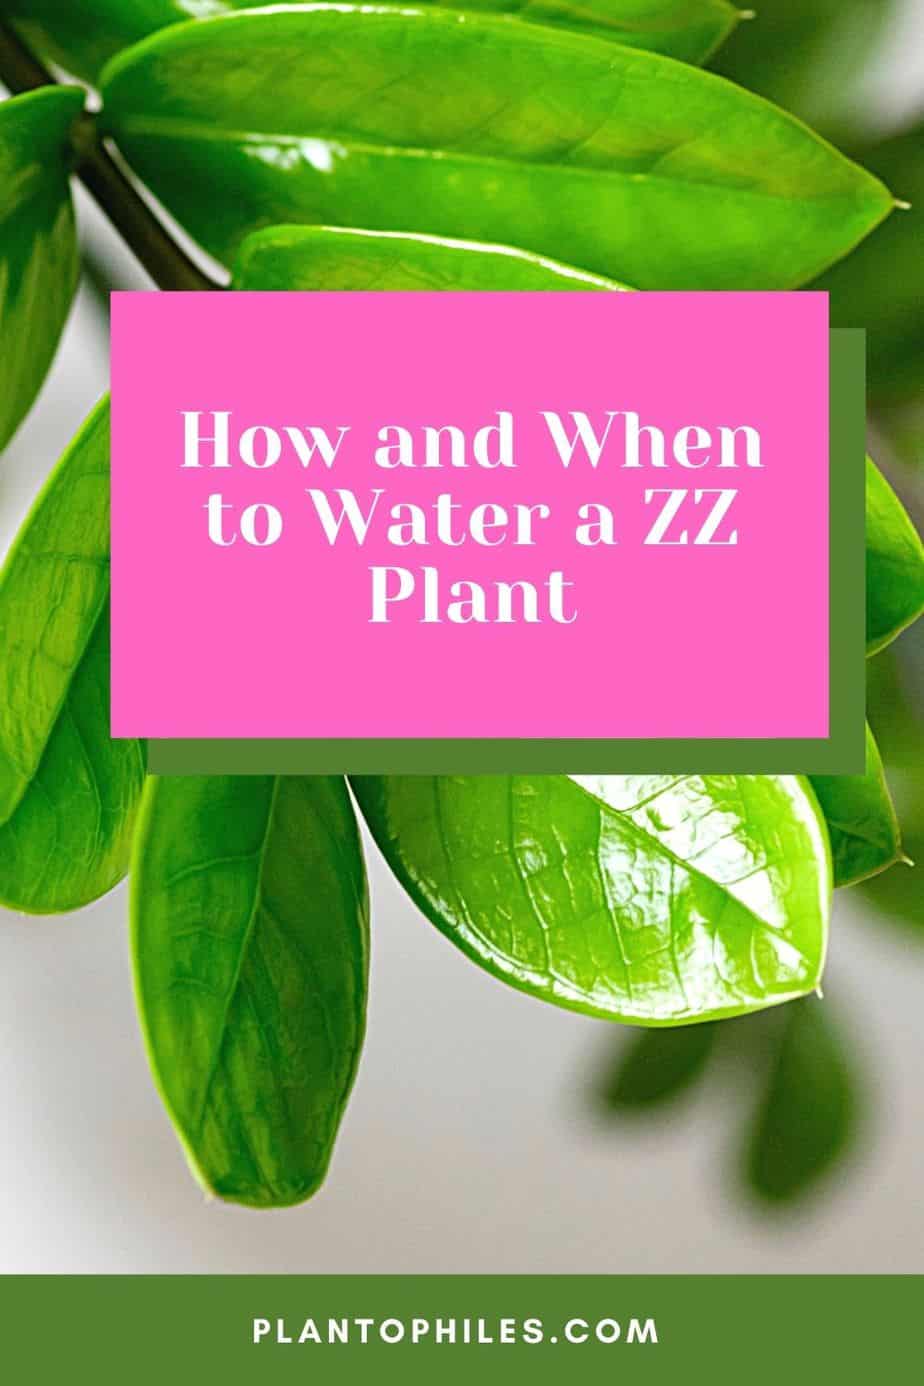 How and When to Water a ZZ Plant